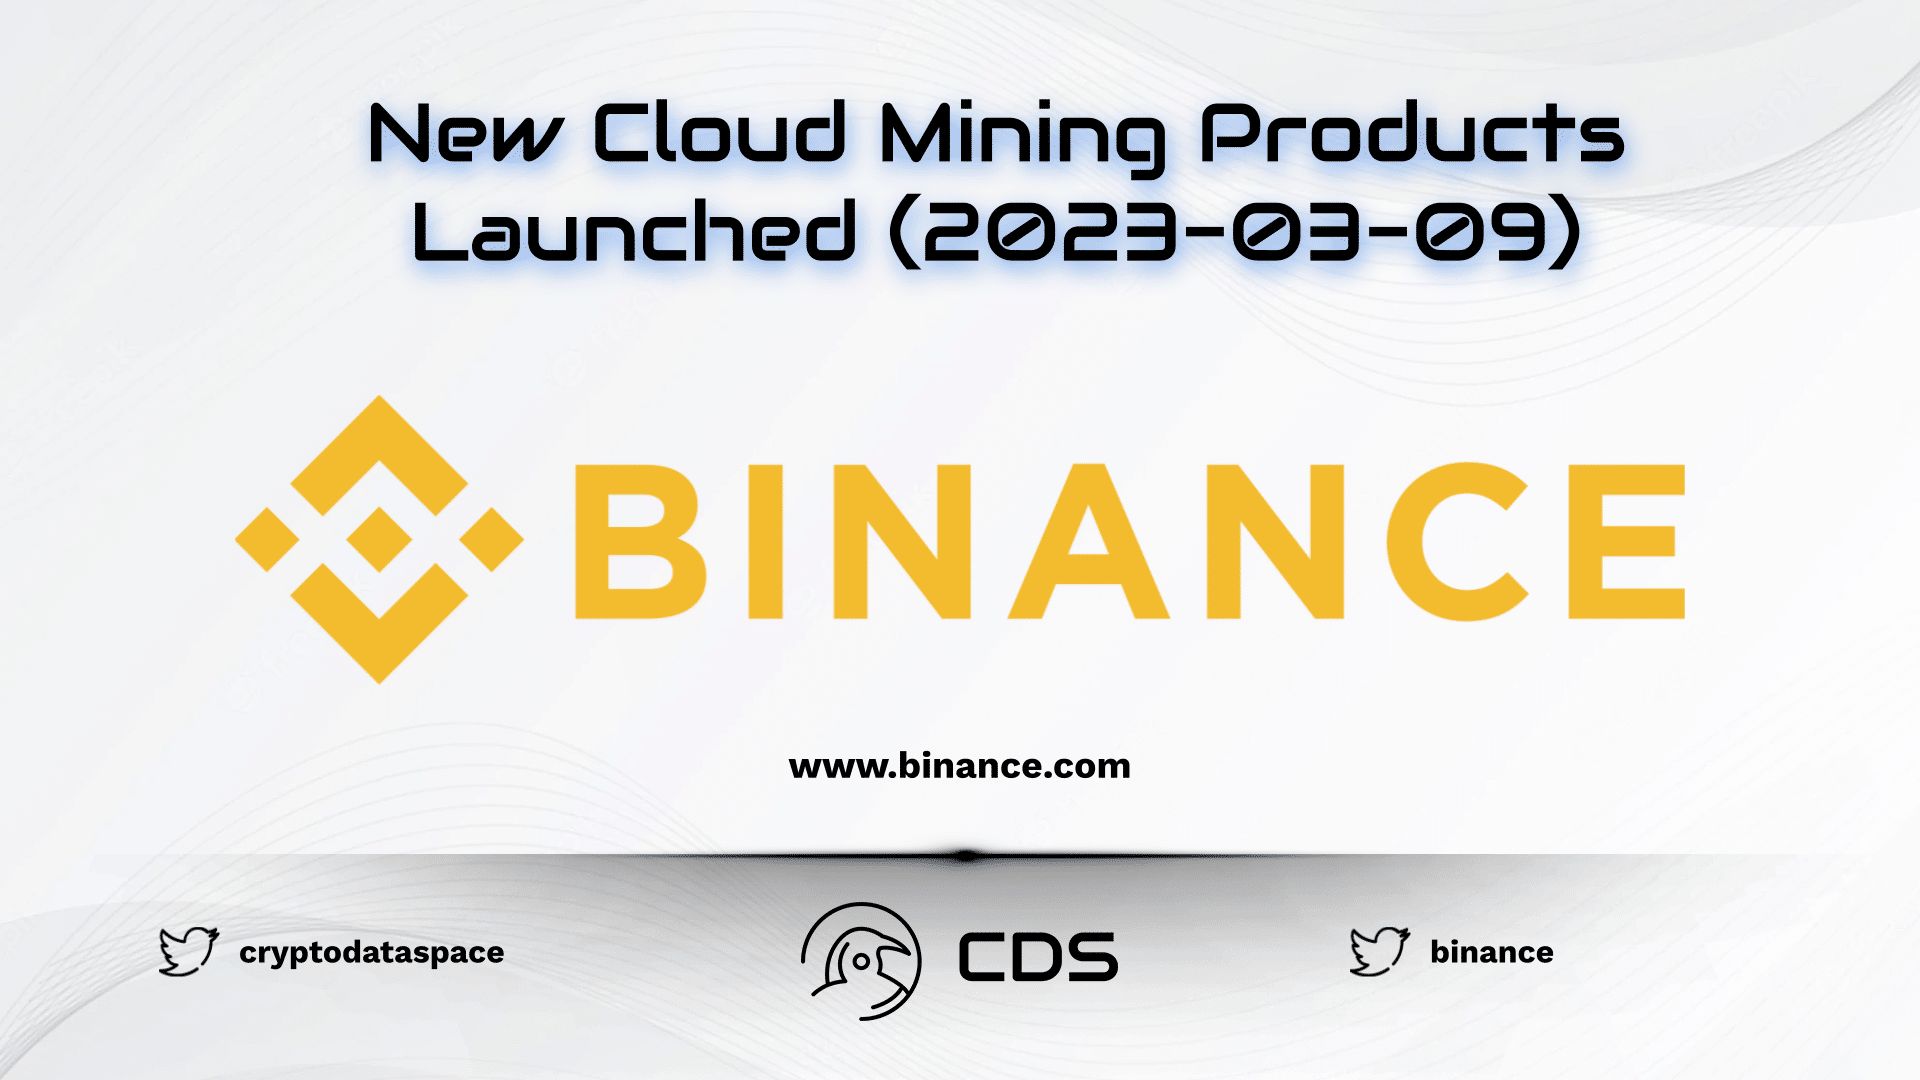 New Cloud Mining Products Launched (2023-03-09)